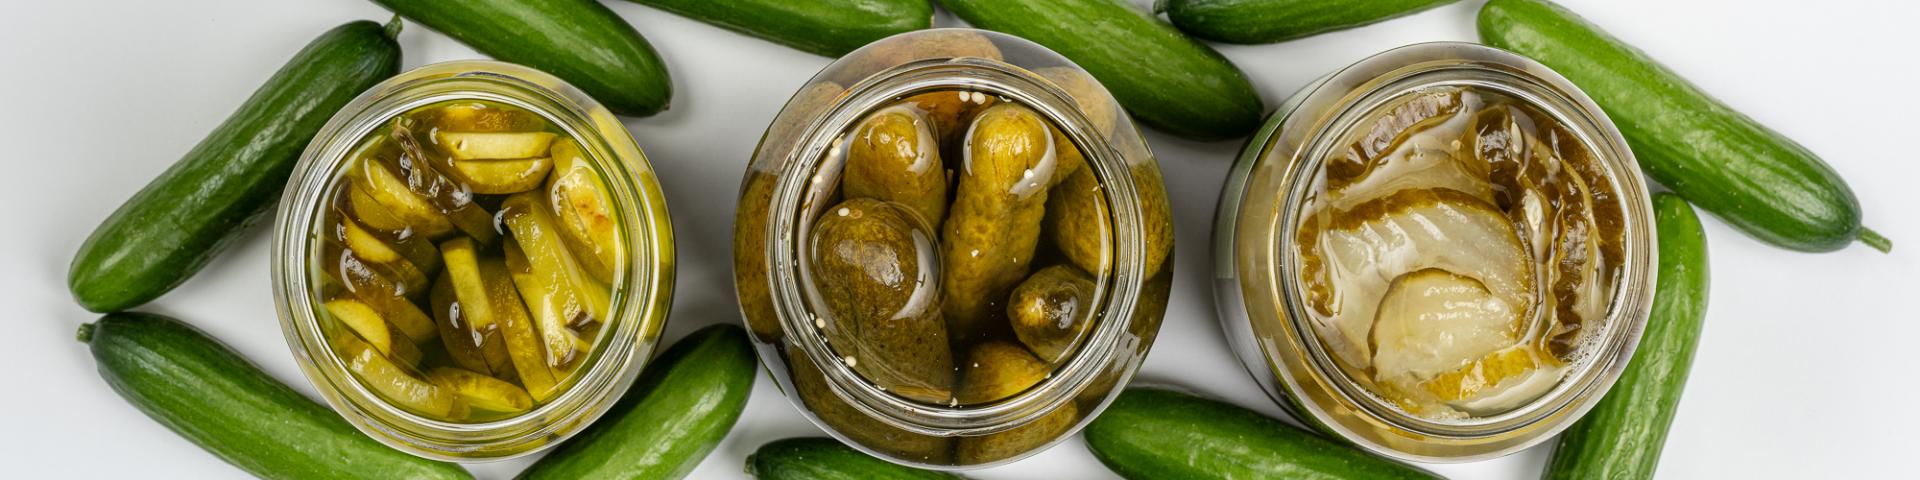 Pickled Cucumbers and Gherkins_3795_3795_HZ82940